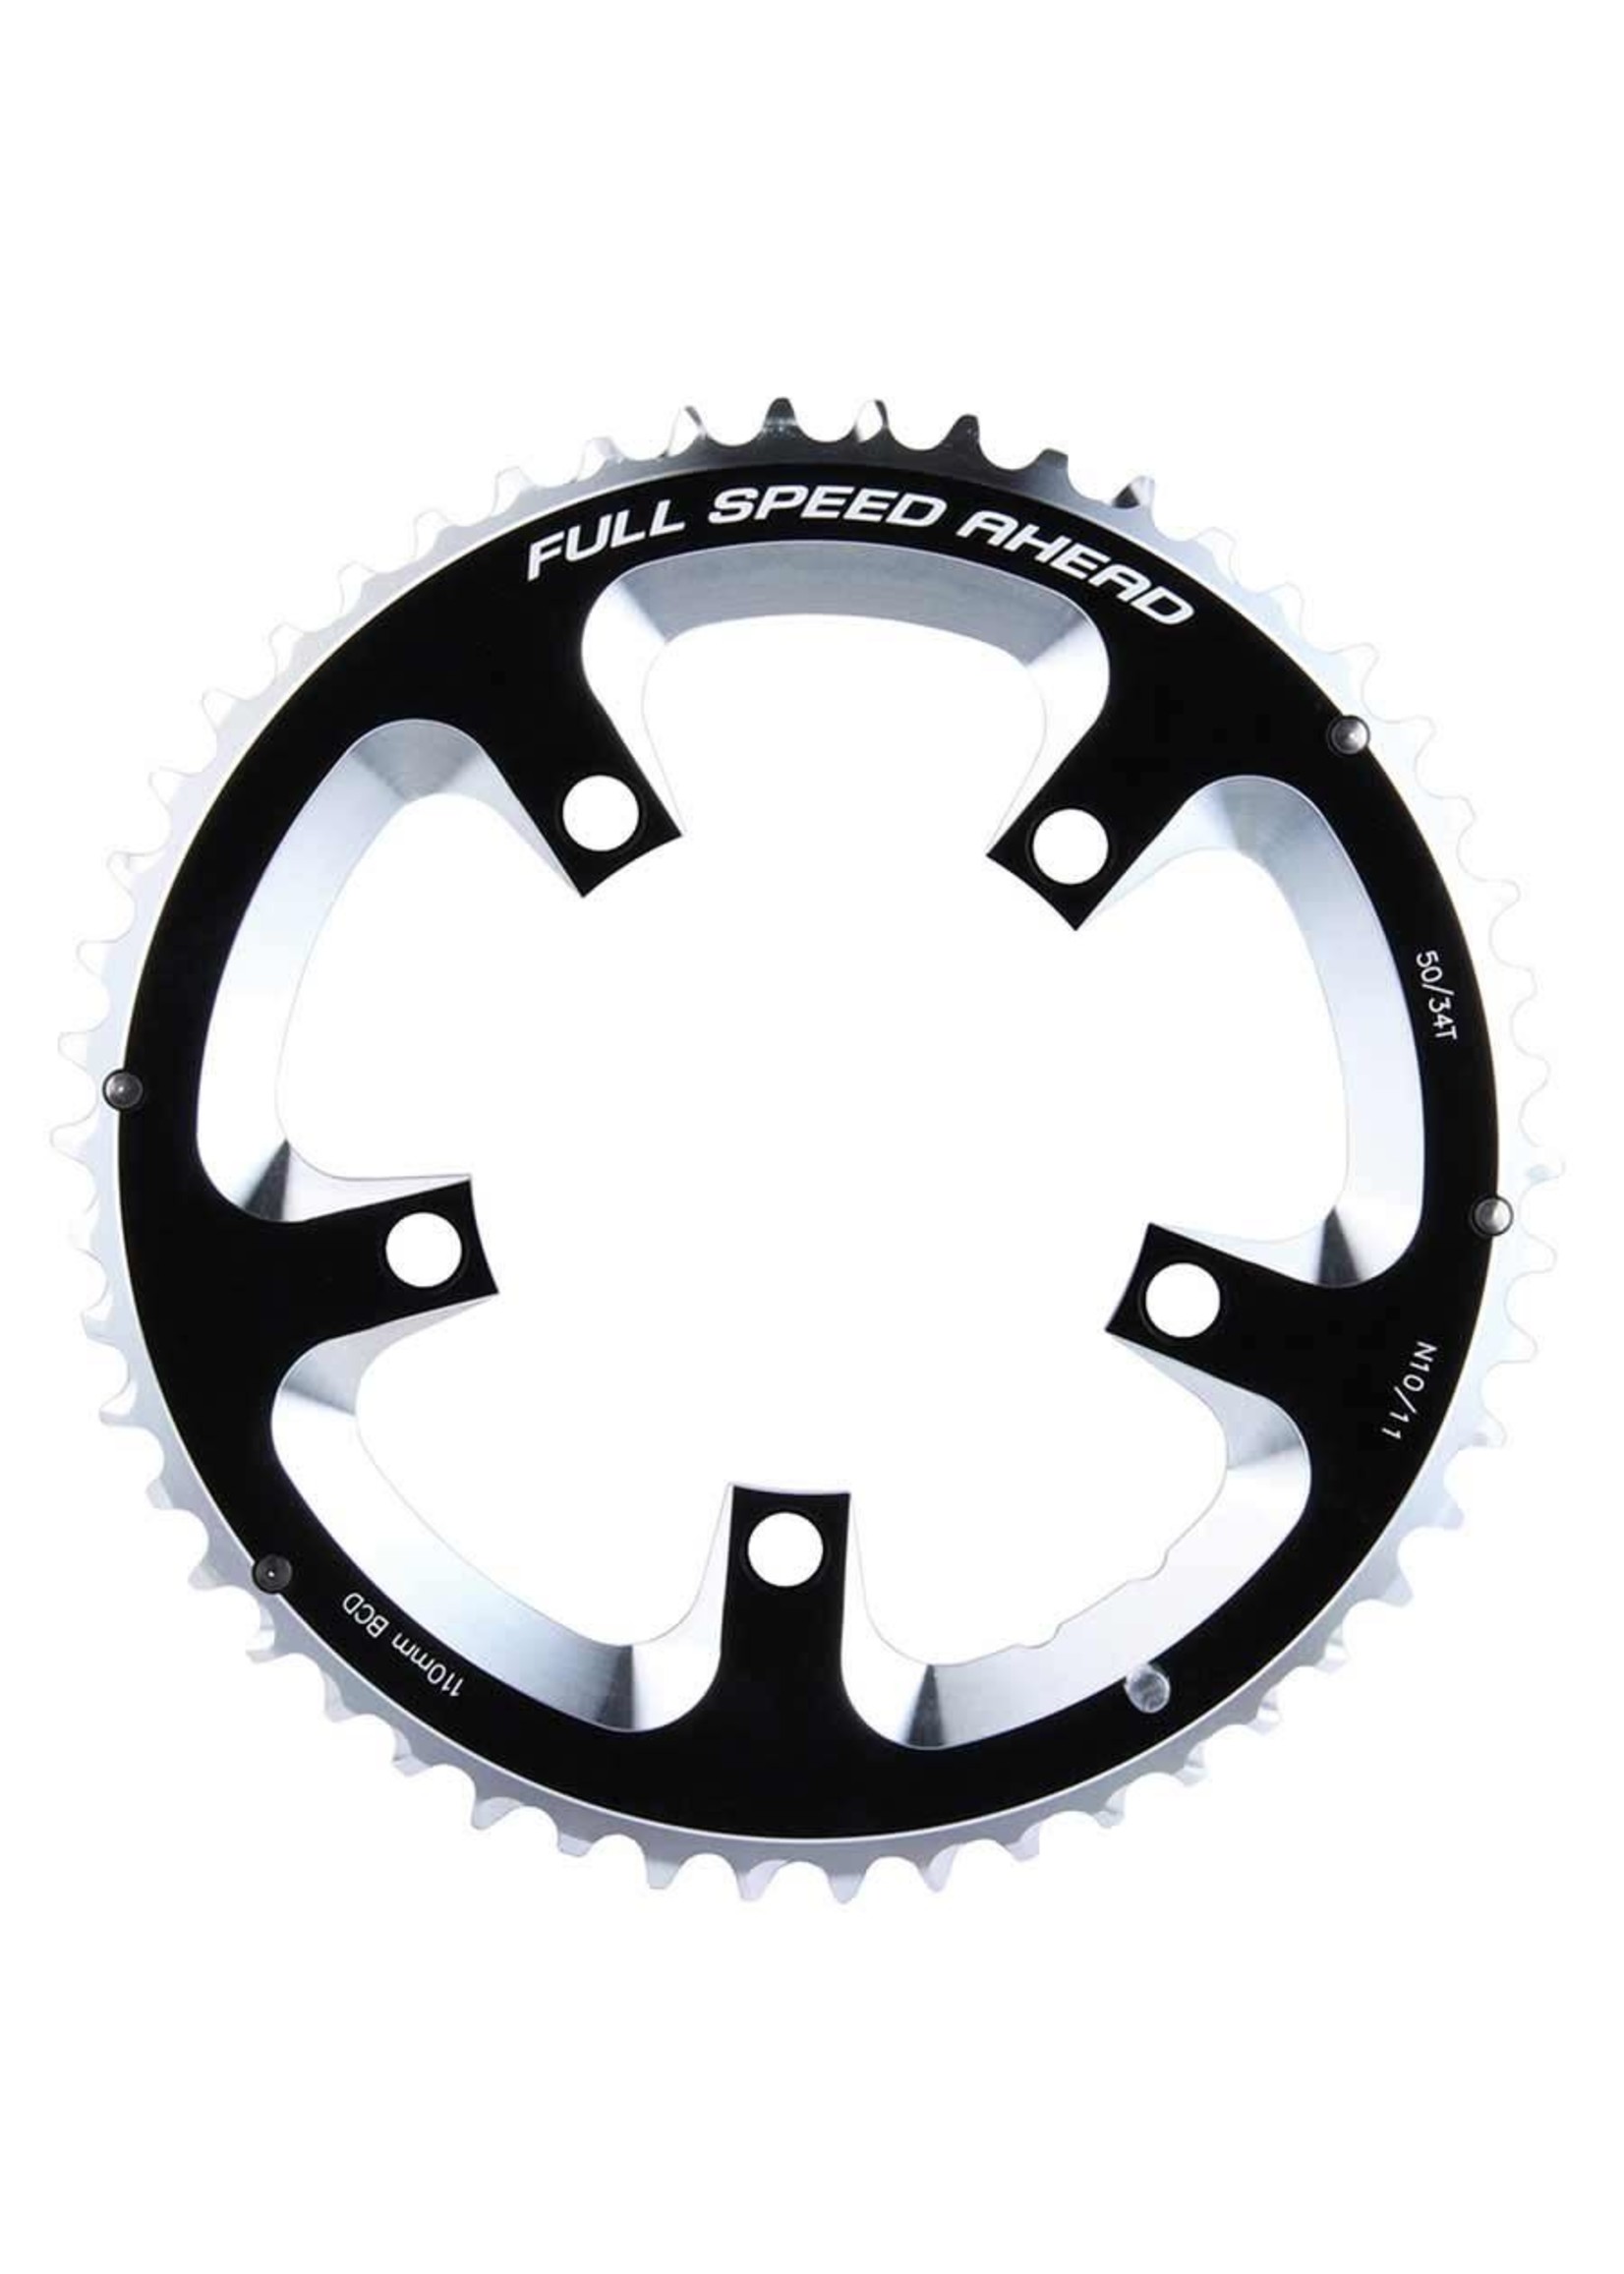 FSA Full Speed Ahead FSA, 50T, 10/11sp., BCD: 110mm, 5 Bolts, Super Road, Outer Chainring, For Double, Aluminum, Black, 371-0250A